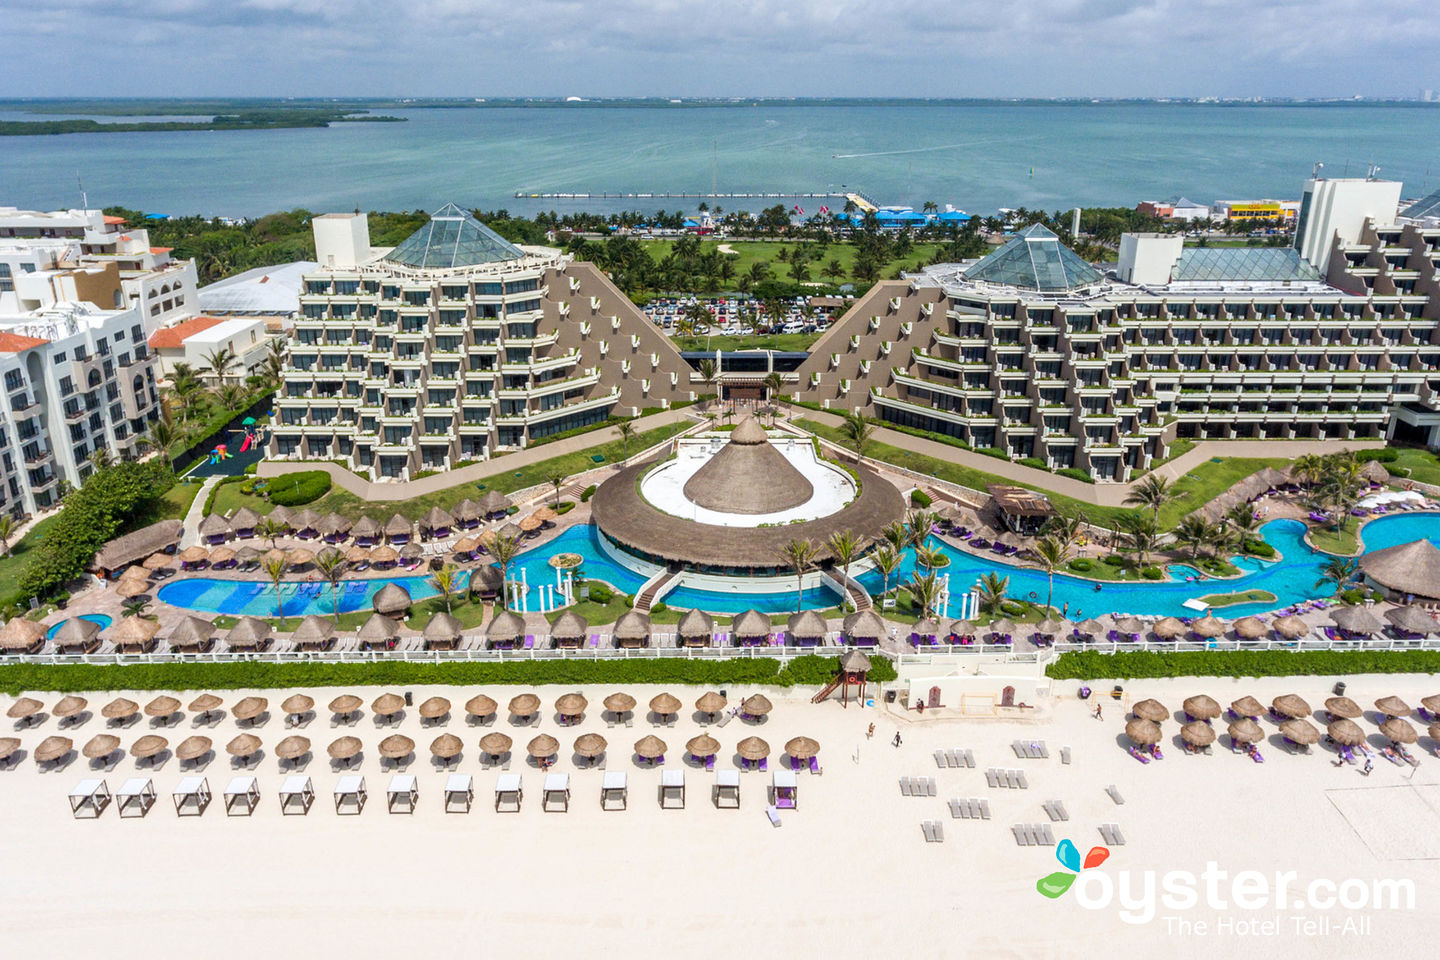 Paradisus Cancun Review: What To REALLY Expect If You Stay